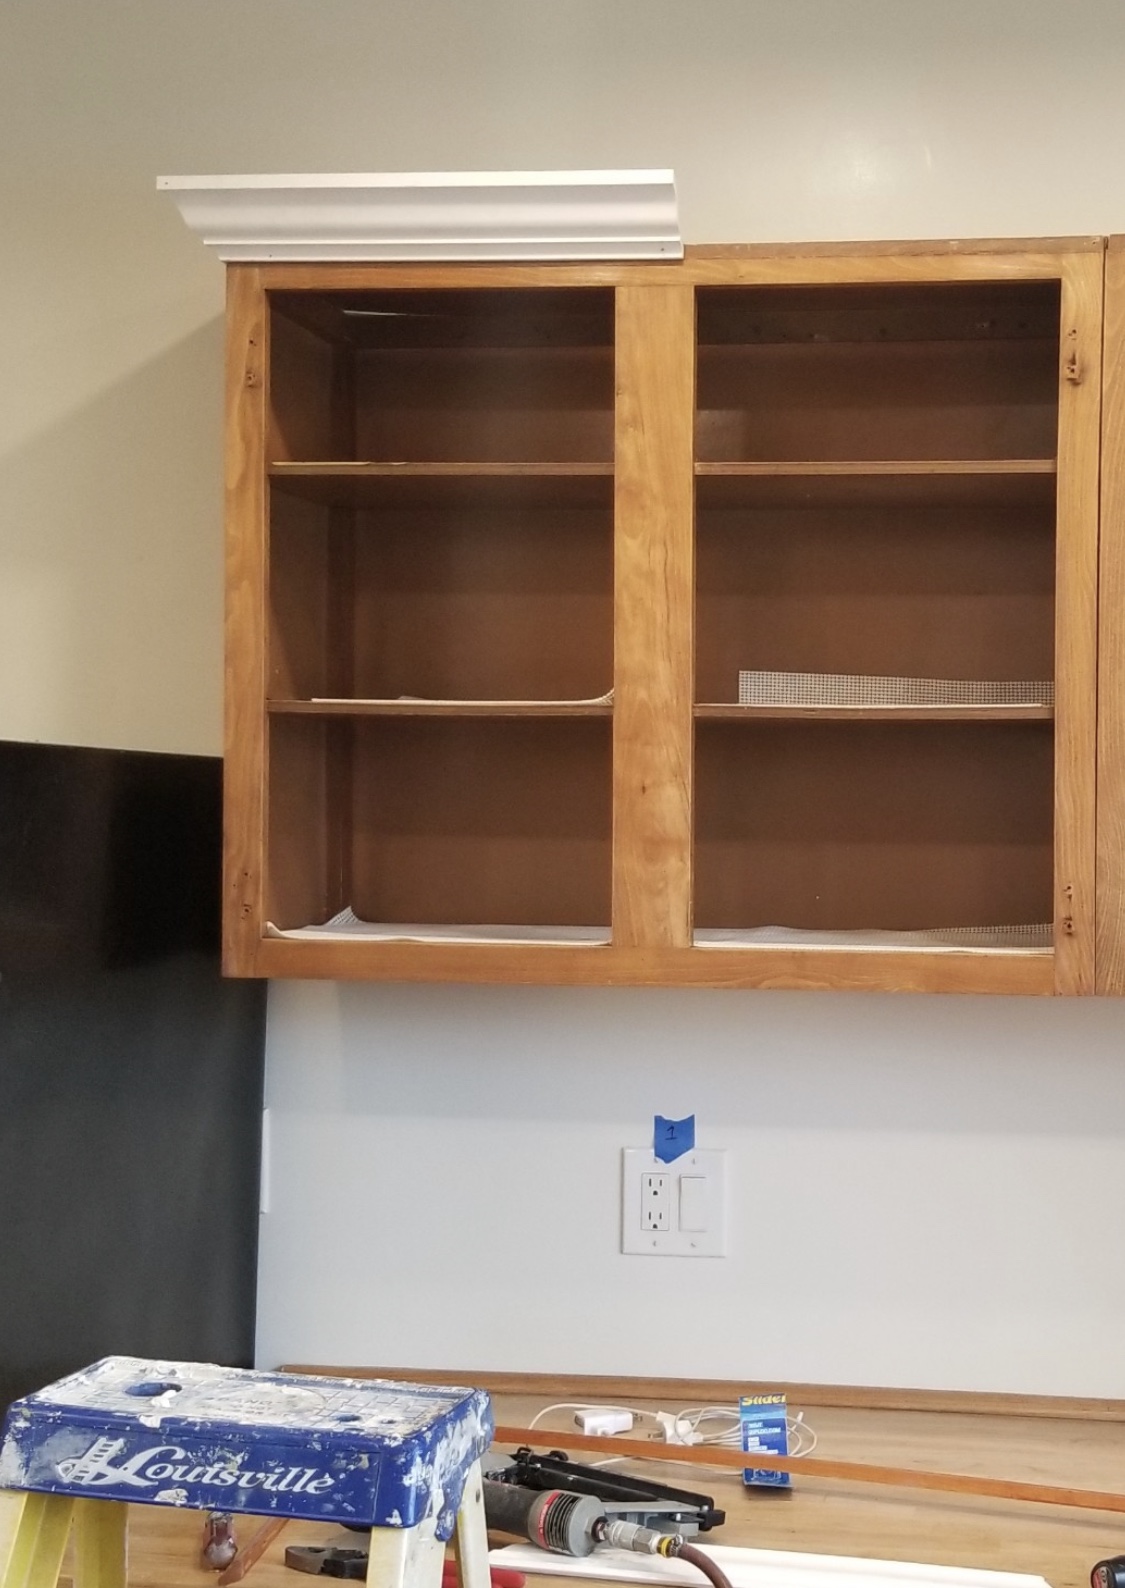 How To Paint Wooden Kitchen Cabinets - Step by Step Guide - After Step 1 Kitchen Photos #diy #cabinets #Kitchen #painting #kitchencabinets #paintingkitchen #benjaminmoore #beforephotos #home #diyhome #homeproject #westchestercounty #newyork Simone Piliero - Simply by Simone